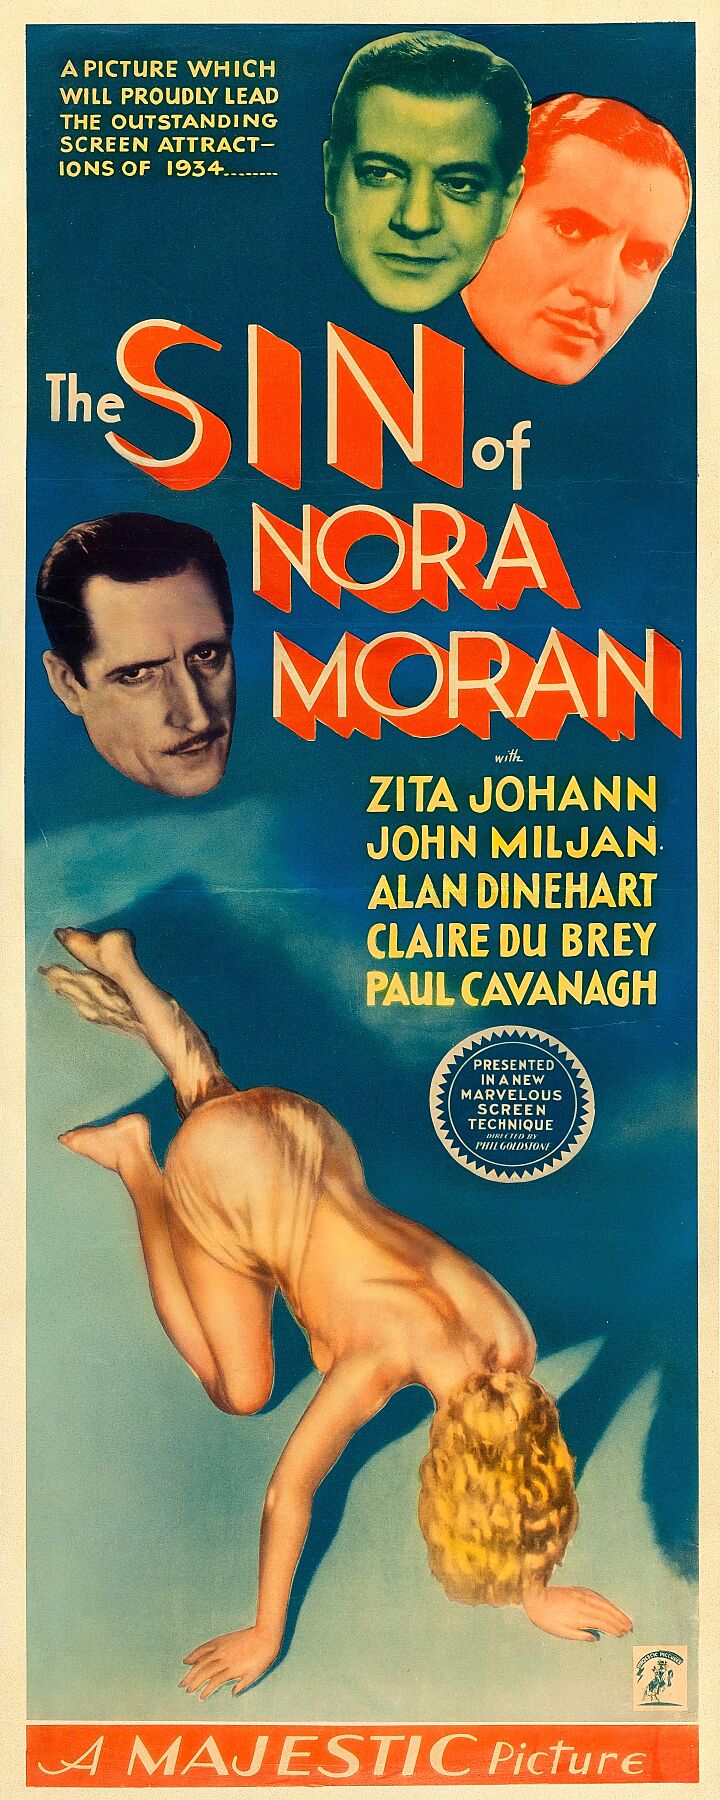 The Sin of Nora Moran is a 1933 American film directed by Phil Goldstone.